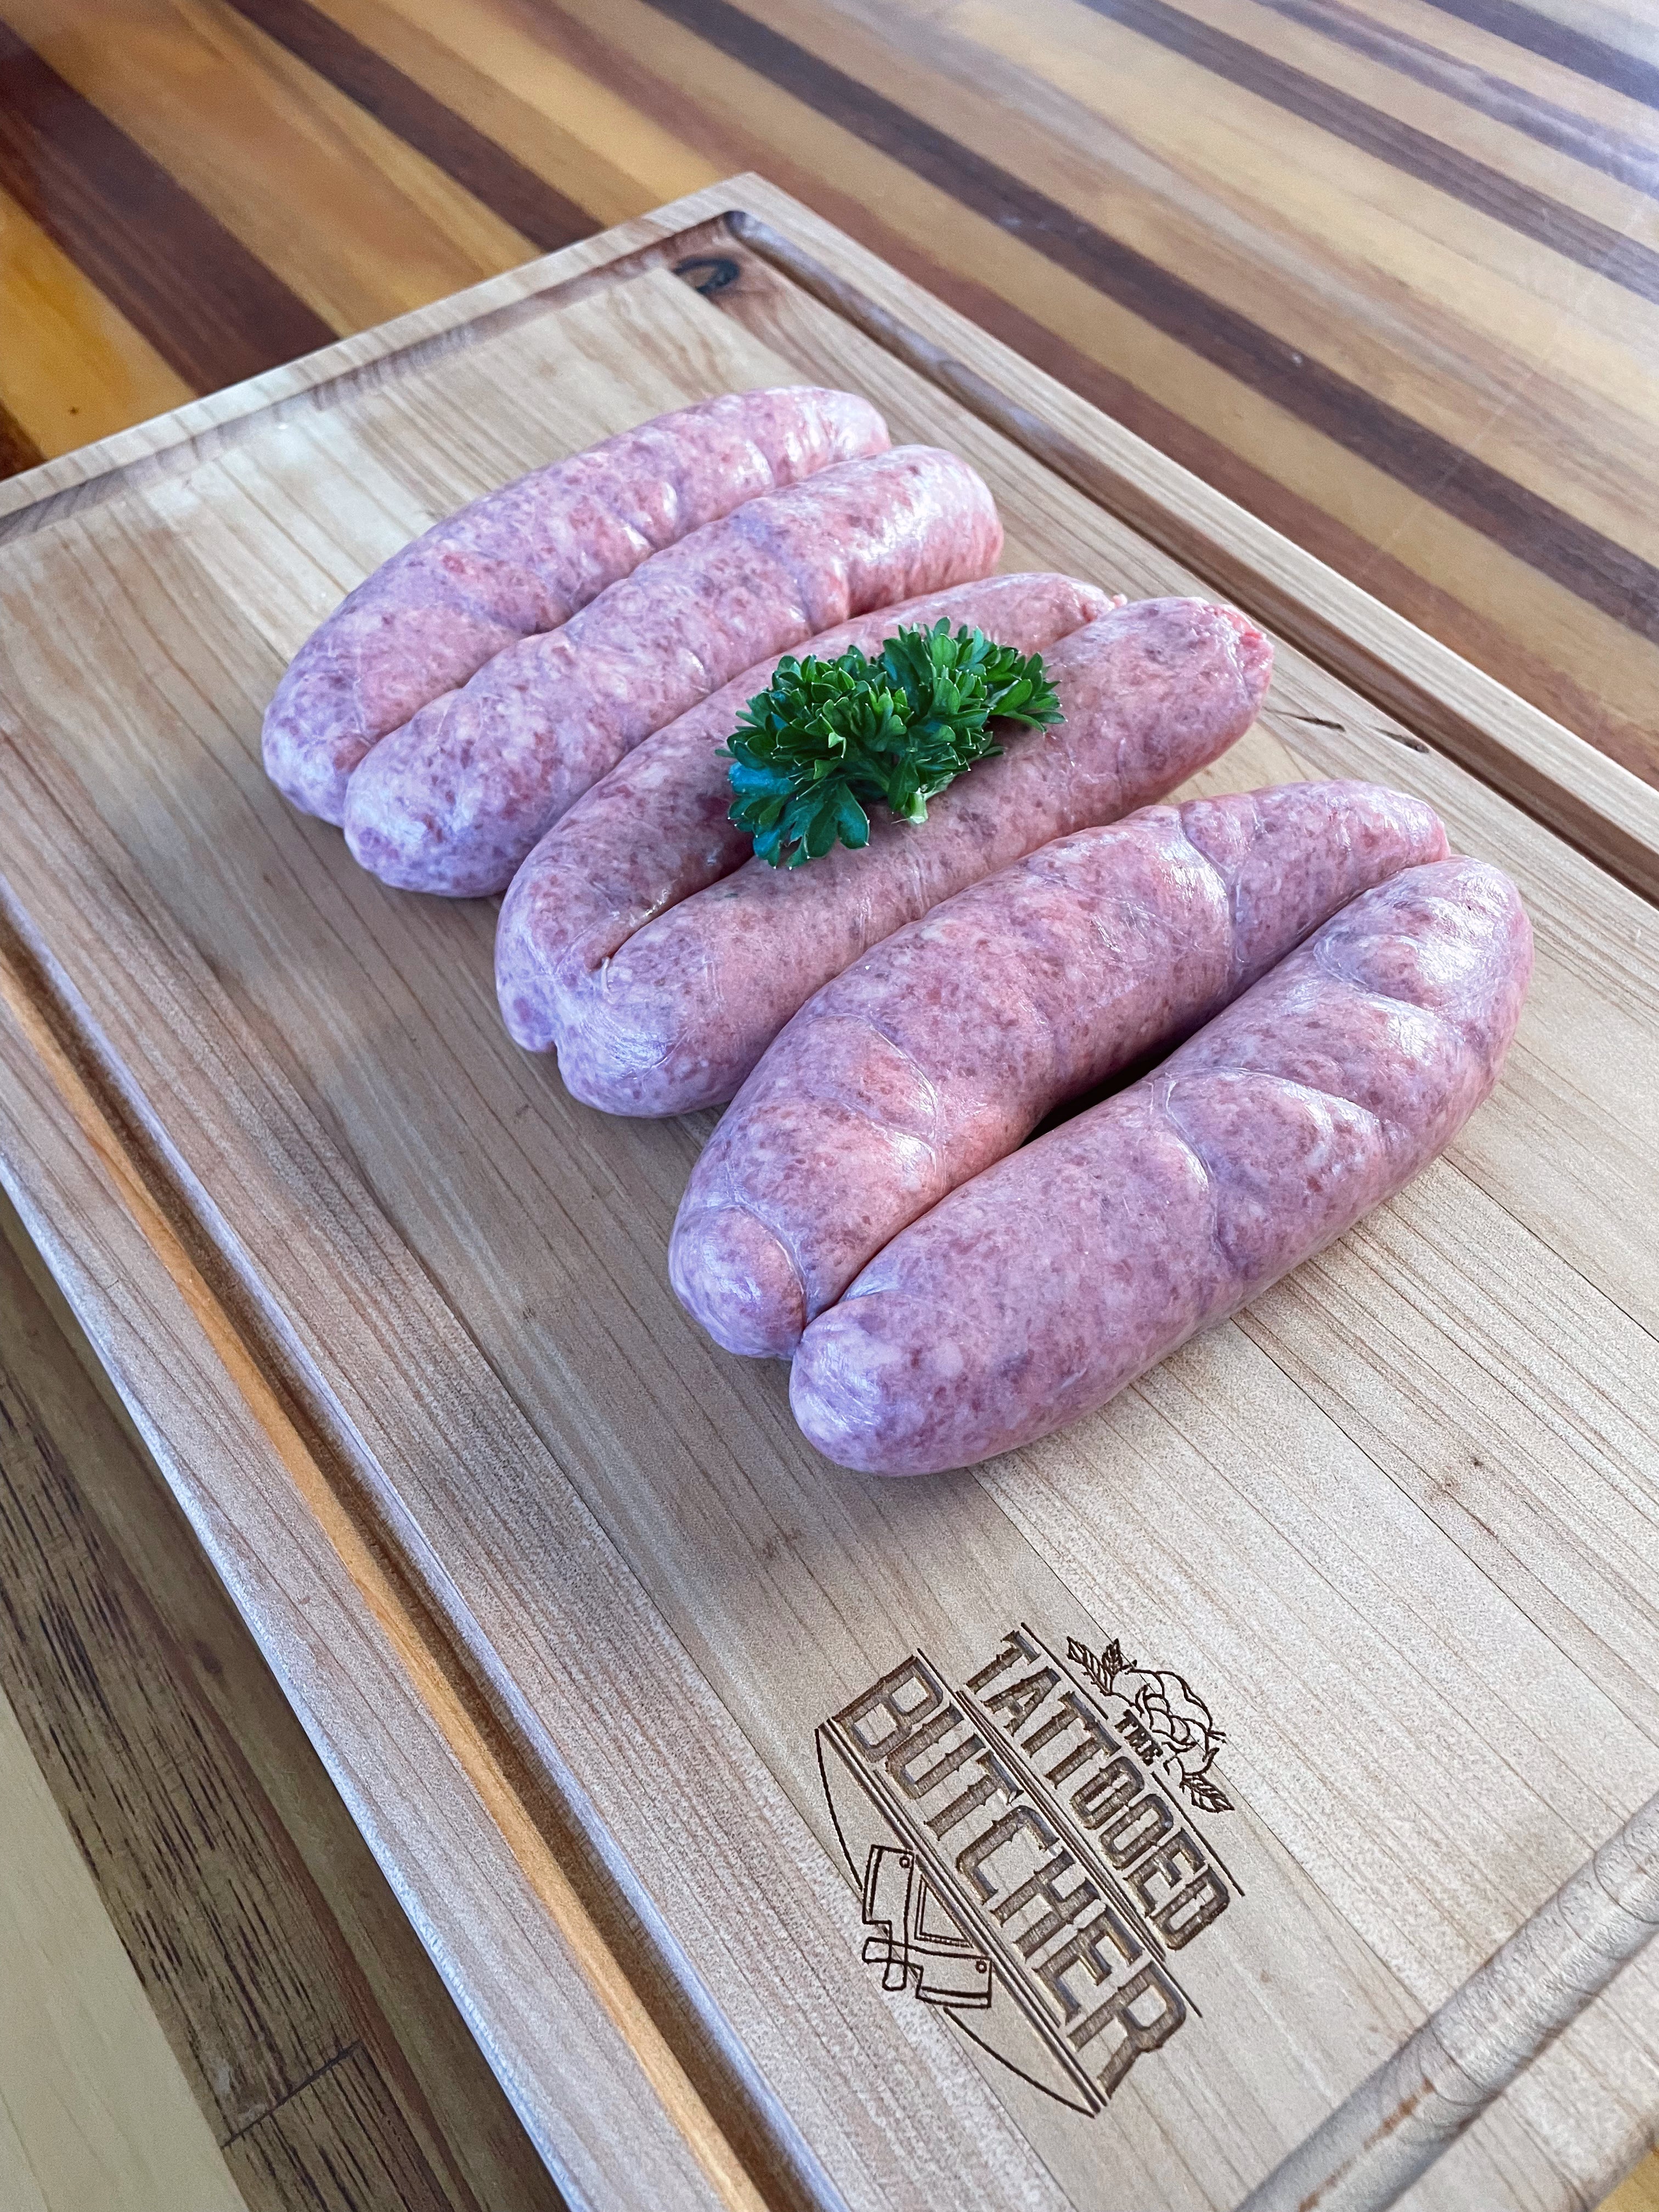 Beef, Herb and Garlic Sausages